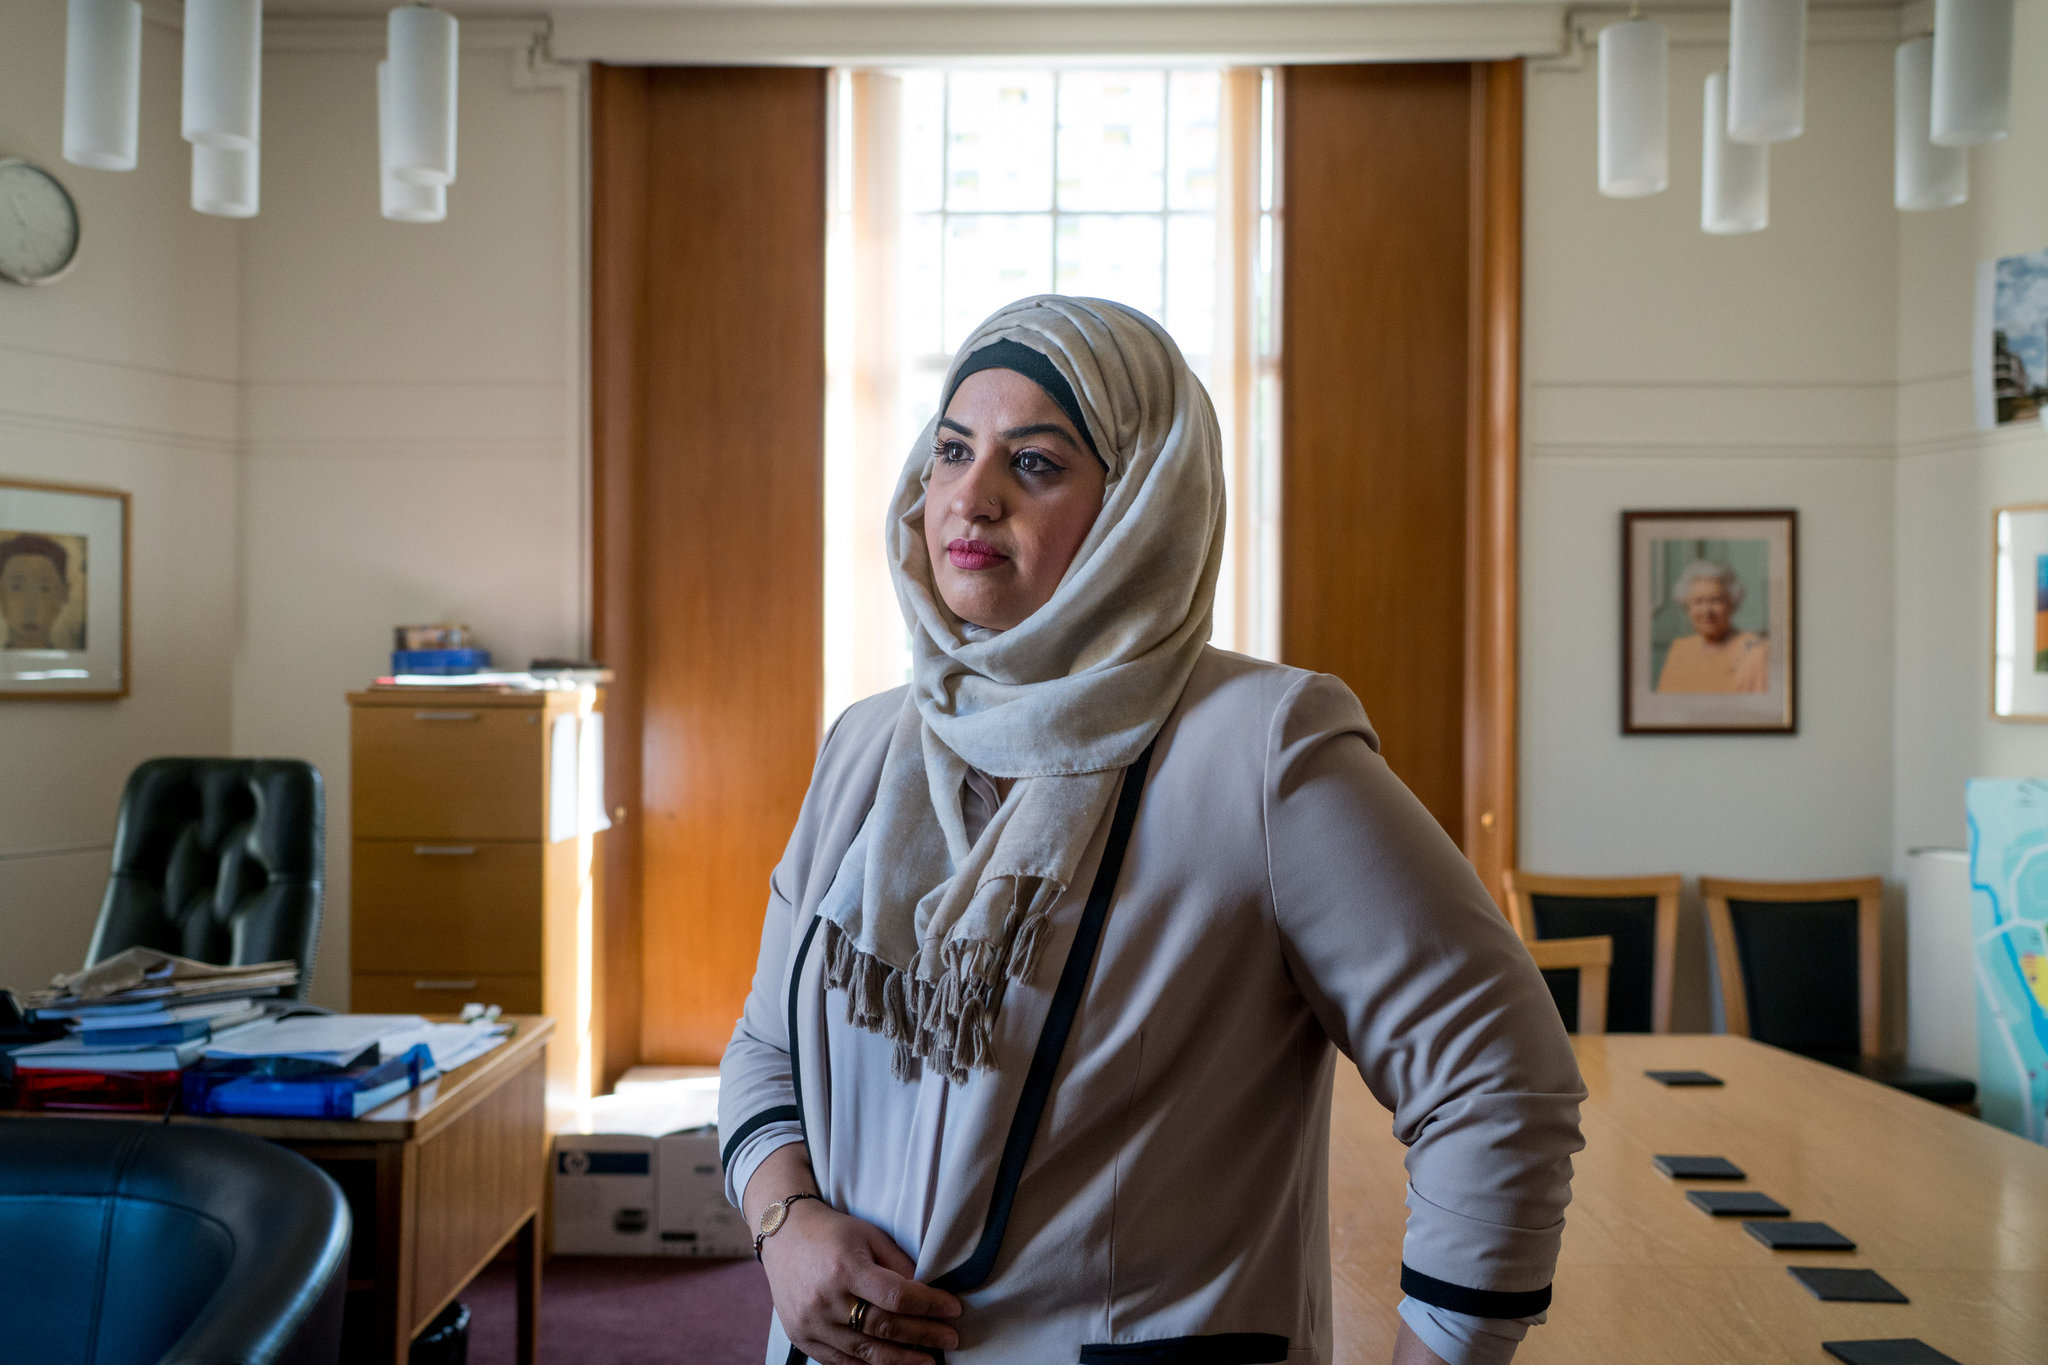 ‘The Way People Look at Us Has Changed’: Muslim Women on Life in Europe